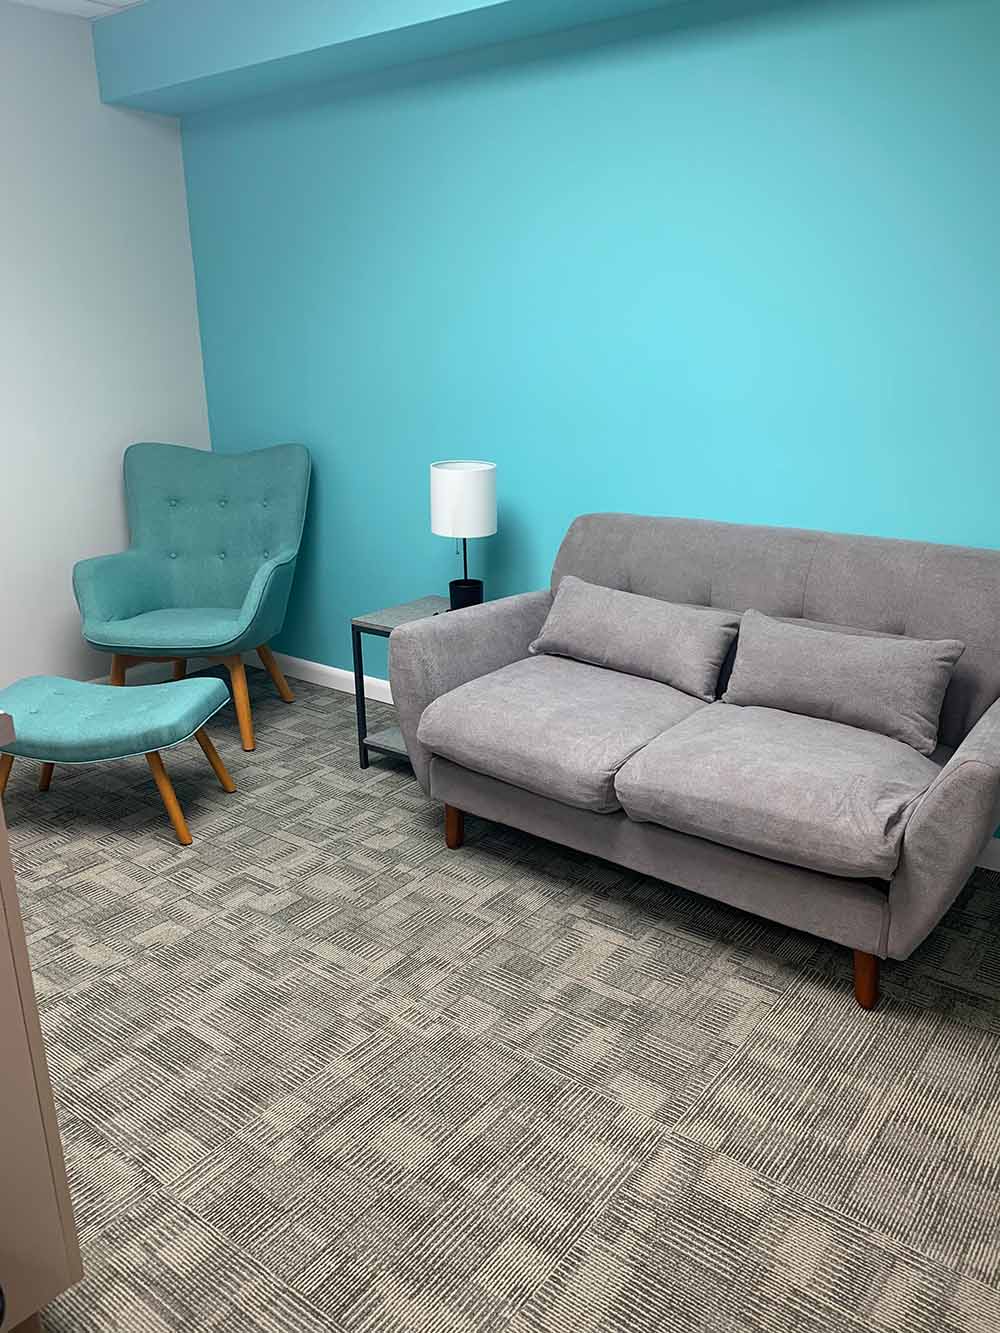 Therapy room at Eleanor Health's mental health treatment clinic in Sparta, New Jersey